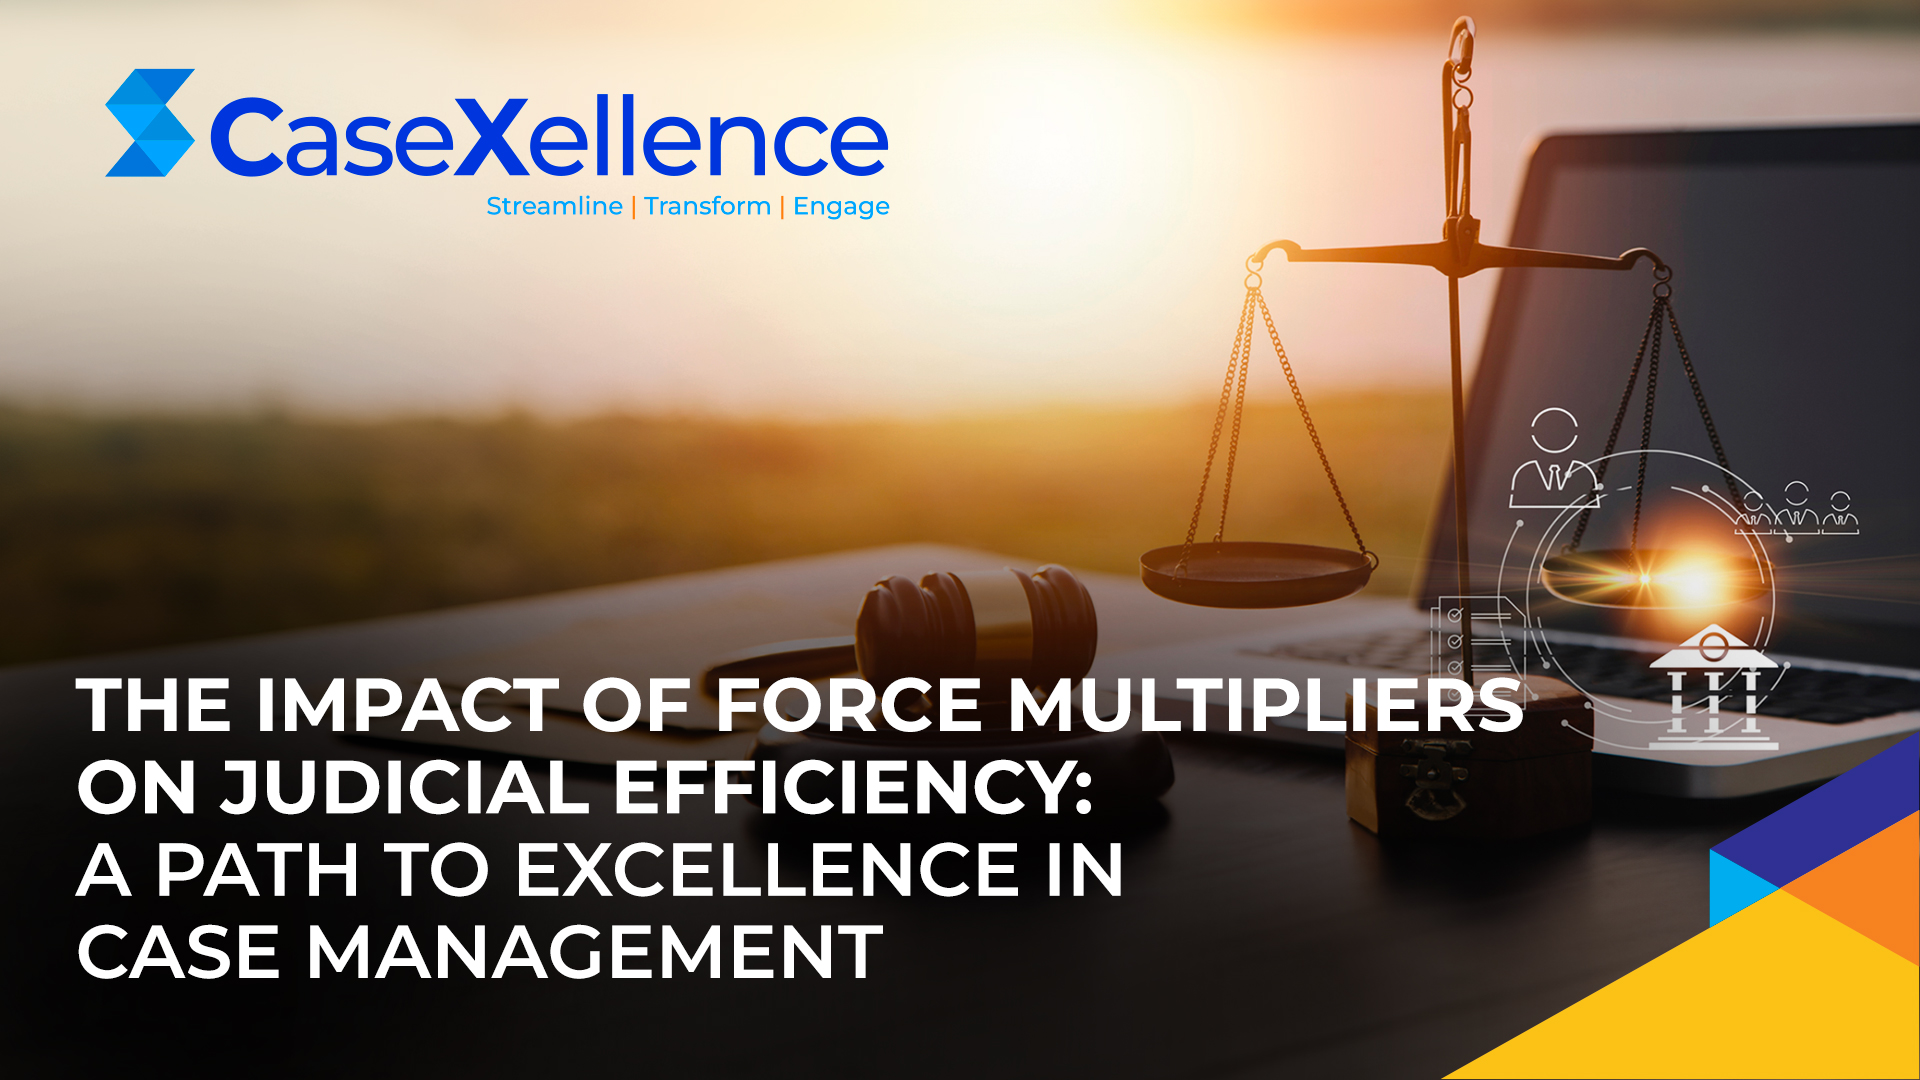 The Impact of Force Multipliers on Judicial Efficiency: A Path to Excellence in Case Management